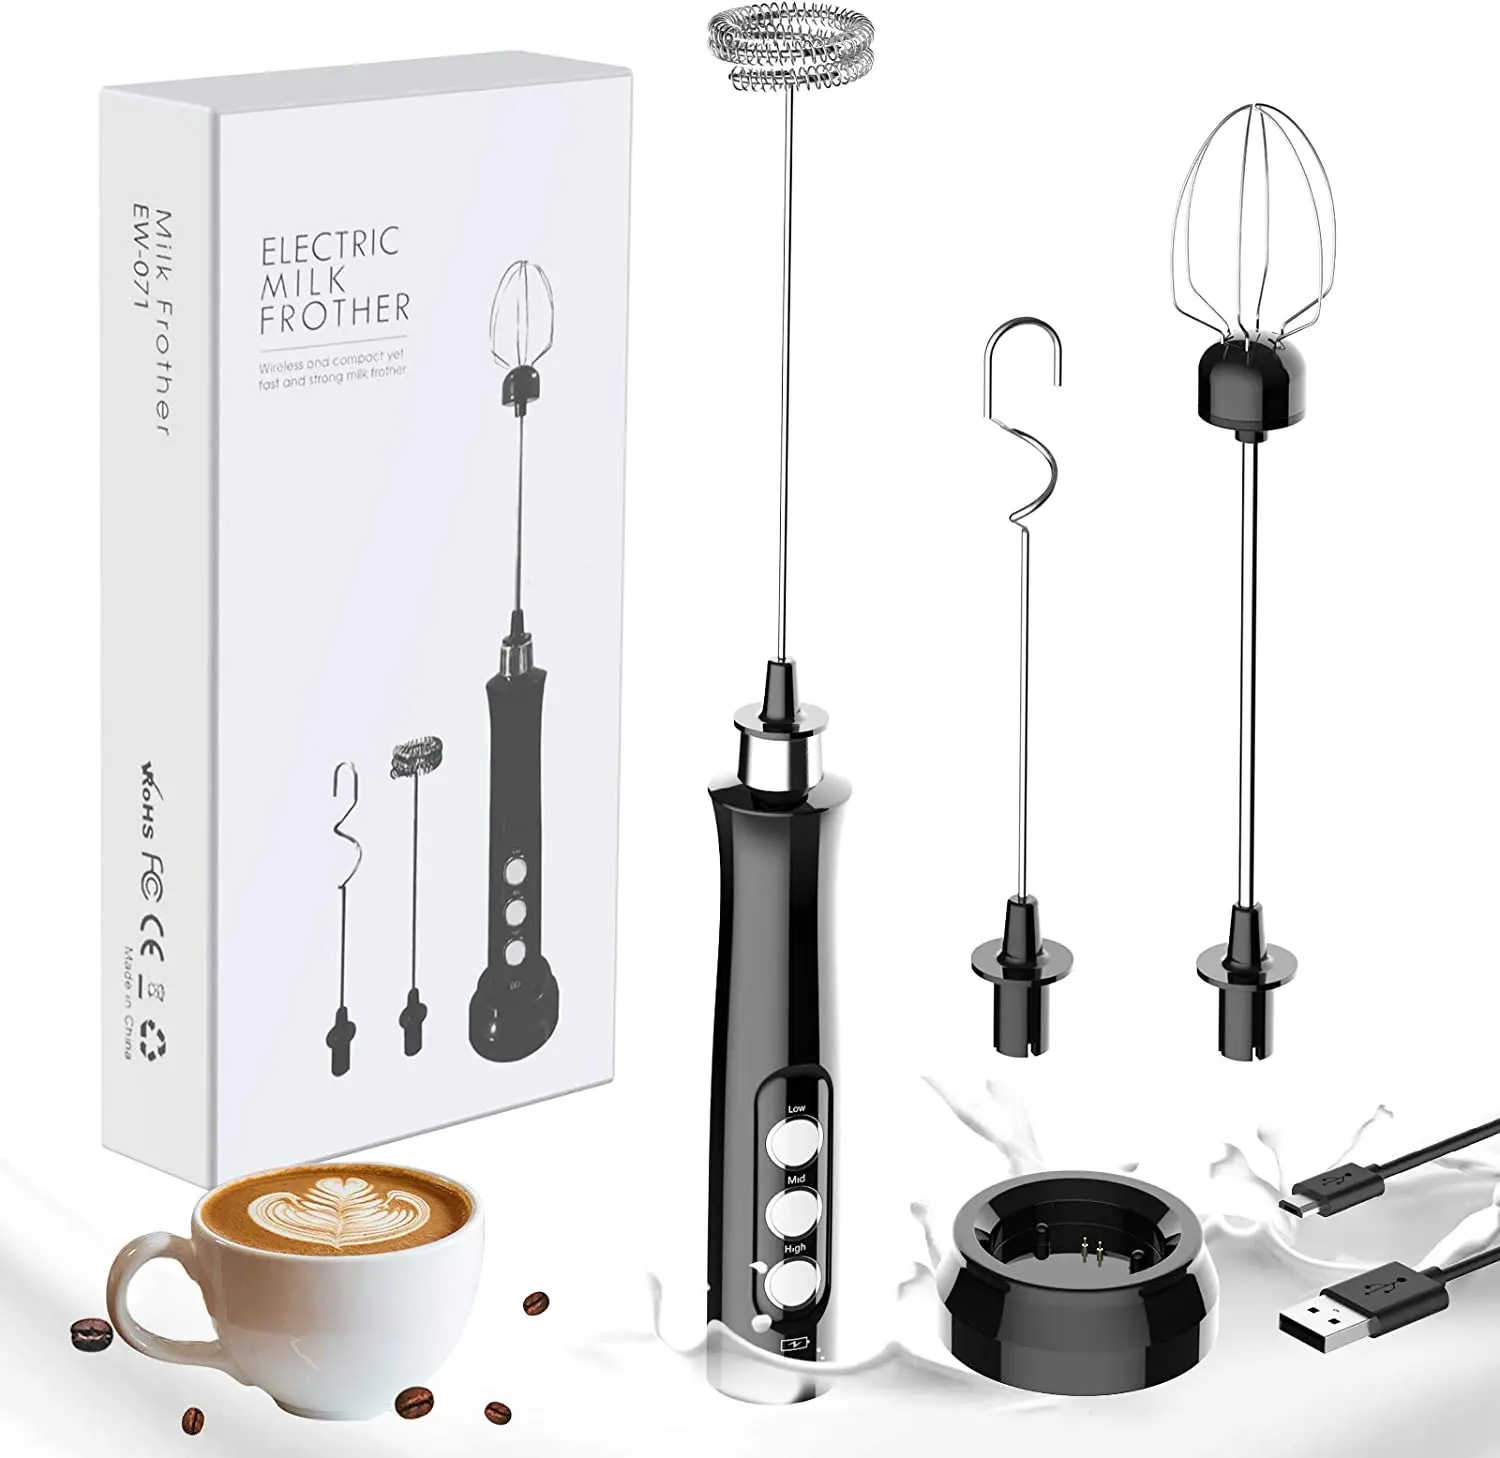 

3 in1 Electric Foamer Mixer Whisk Beater Stirrer 3-Speeds Coffee Milk Drink Frother USB Rechargeable Handheld Food Blender Whisk